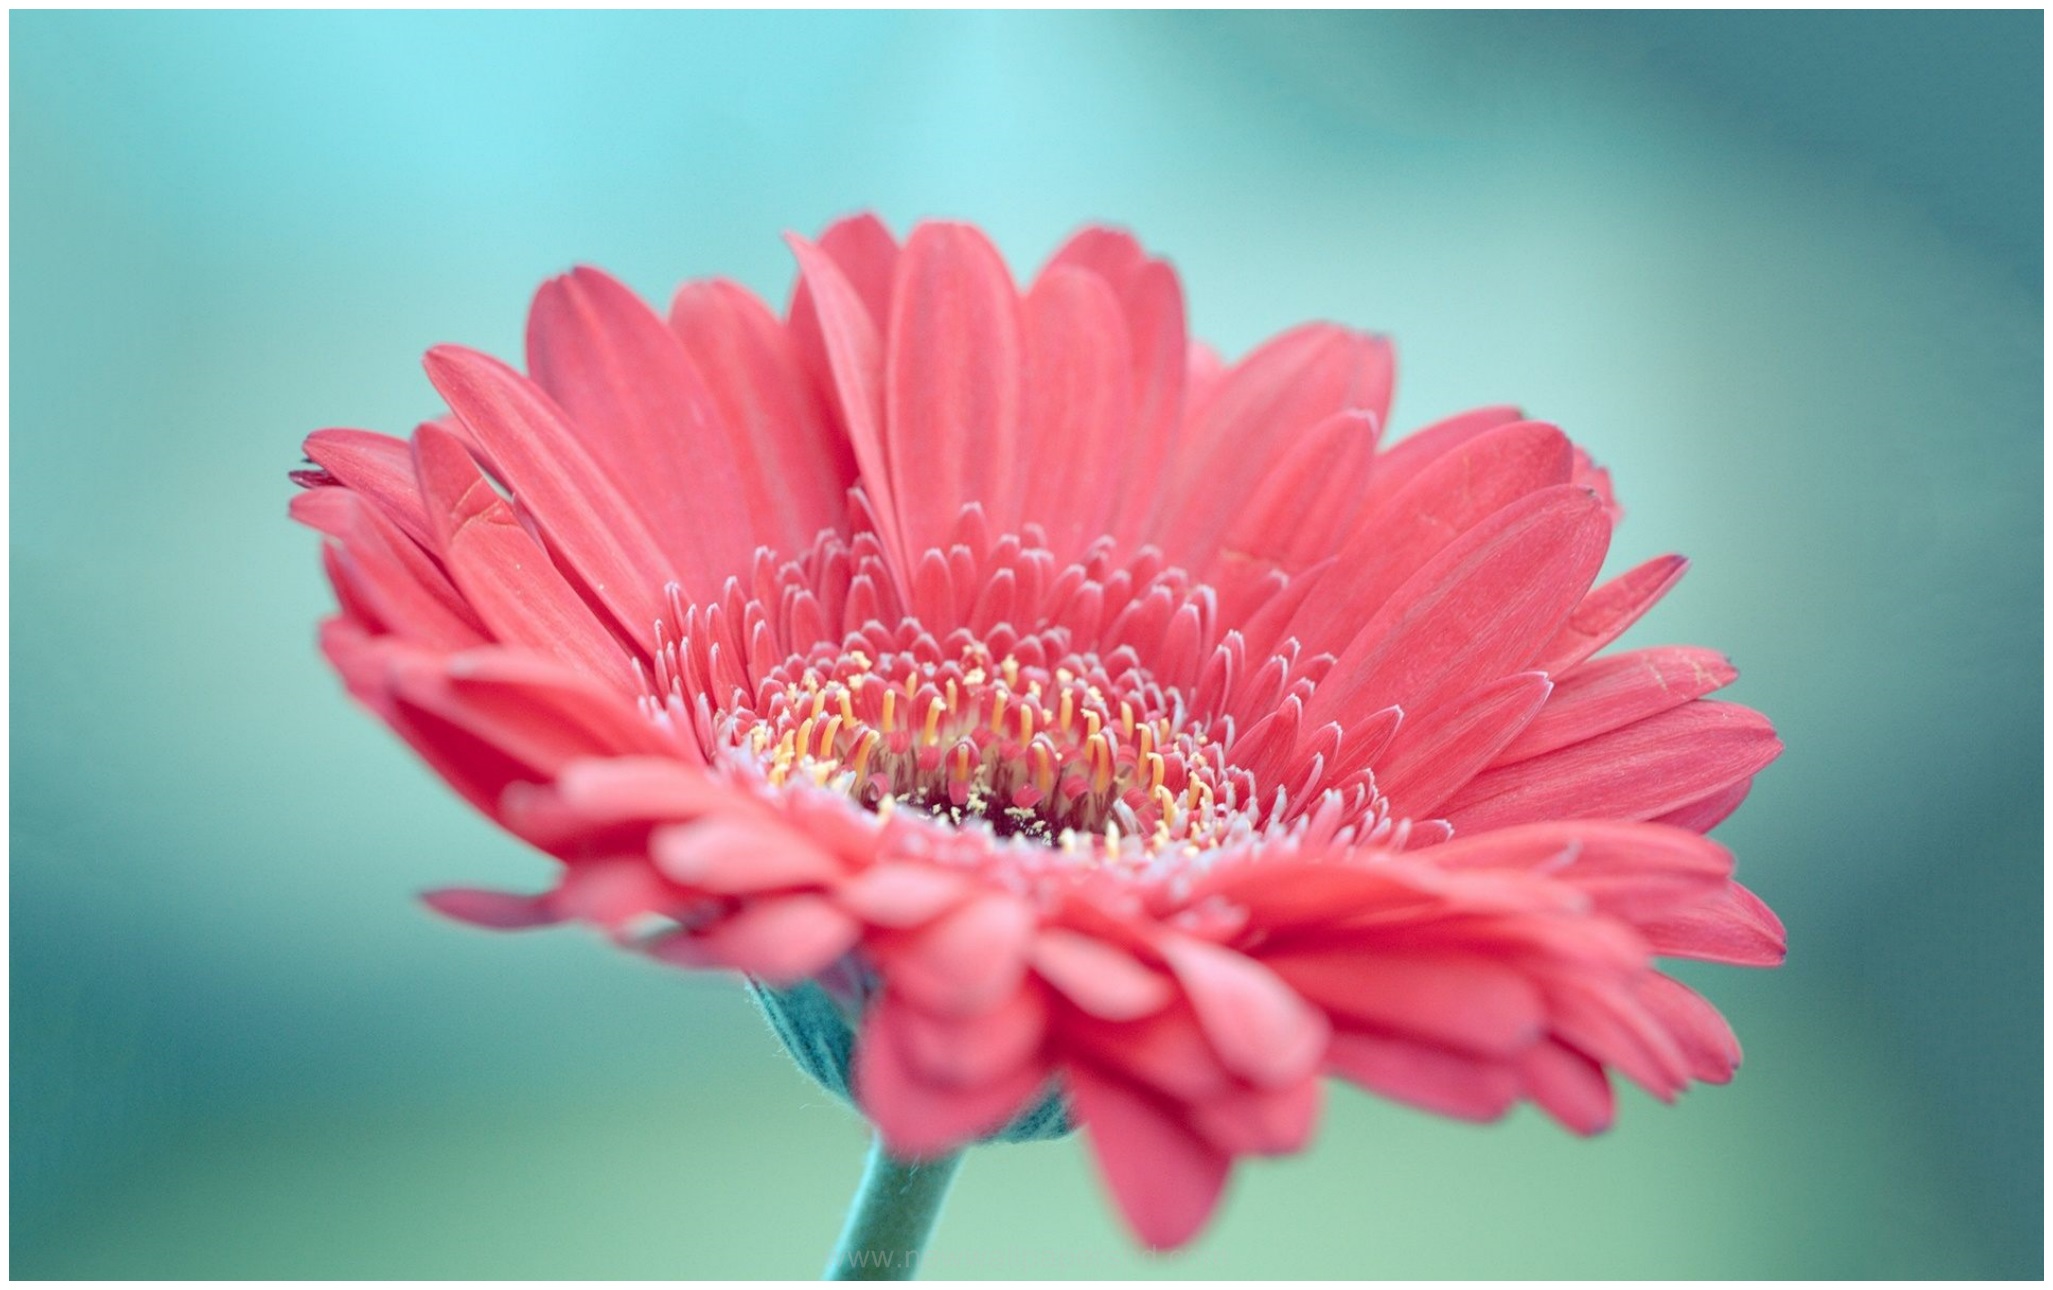 Gerbera Wallpapers and Background Images   stmednet